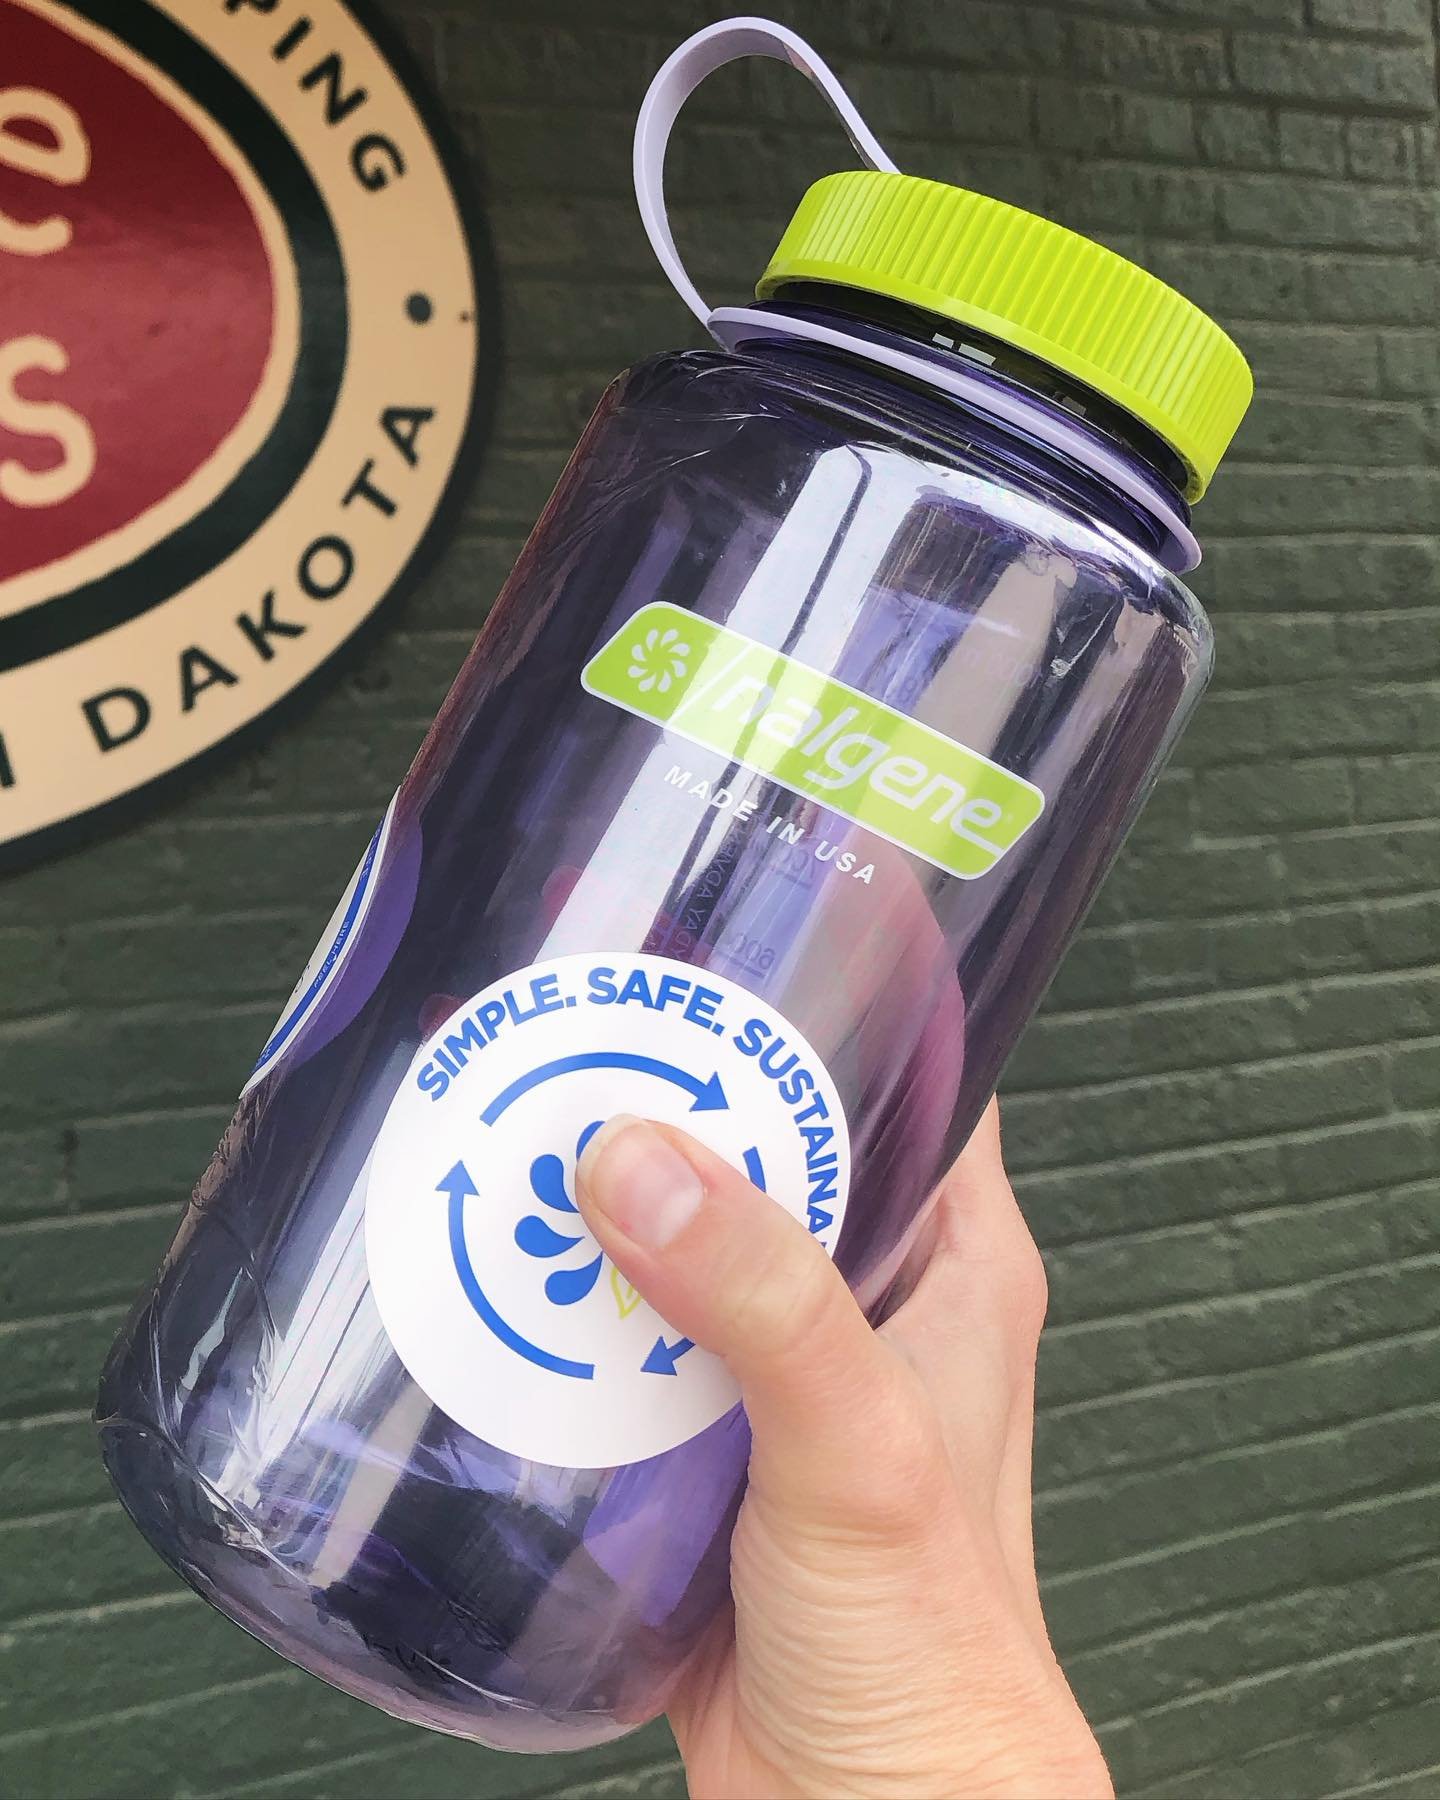 TODAY (Monday, April 22) is the LAST DAY to SAVE 20% on ALL IN-STOCK WATER BOTTLES! (Includes reg-priced items only.) Don&rsquo;t miss out!